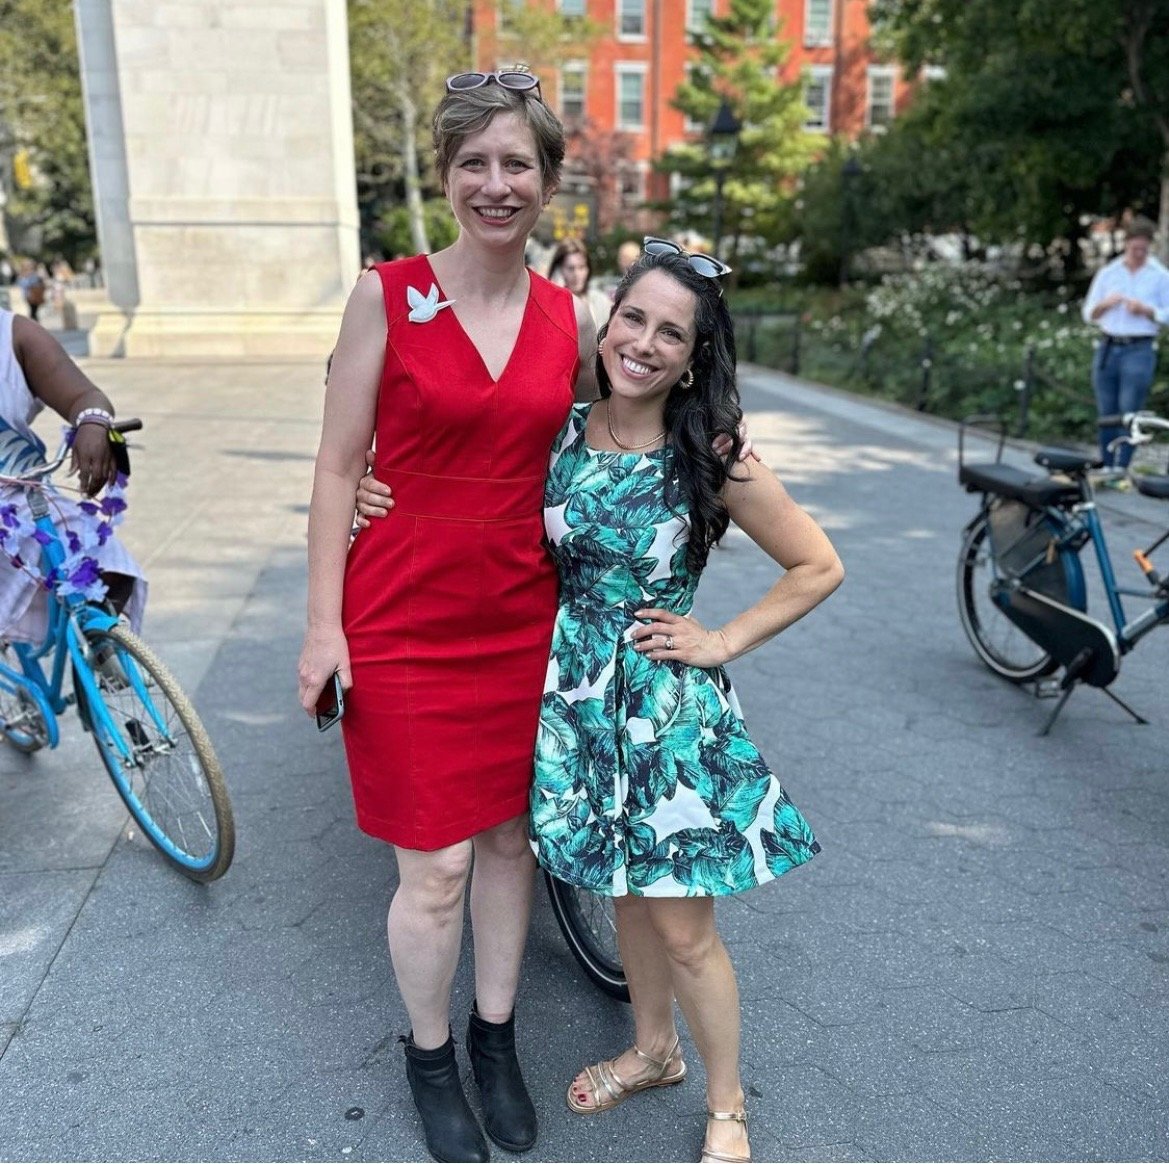 Two women posing for a photo together in Washington Sq. Park.